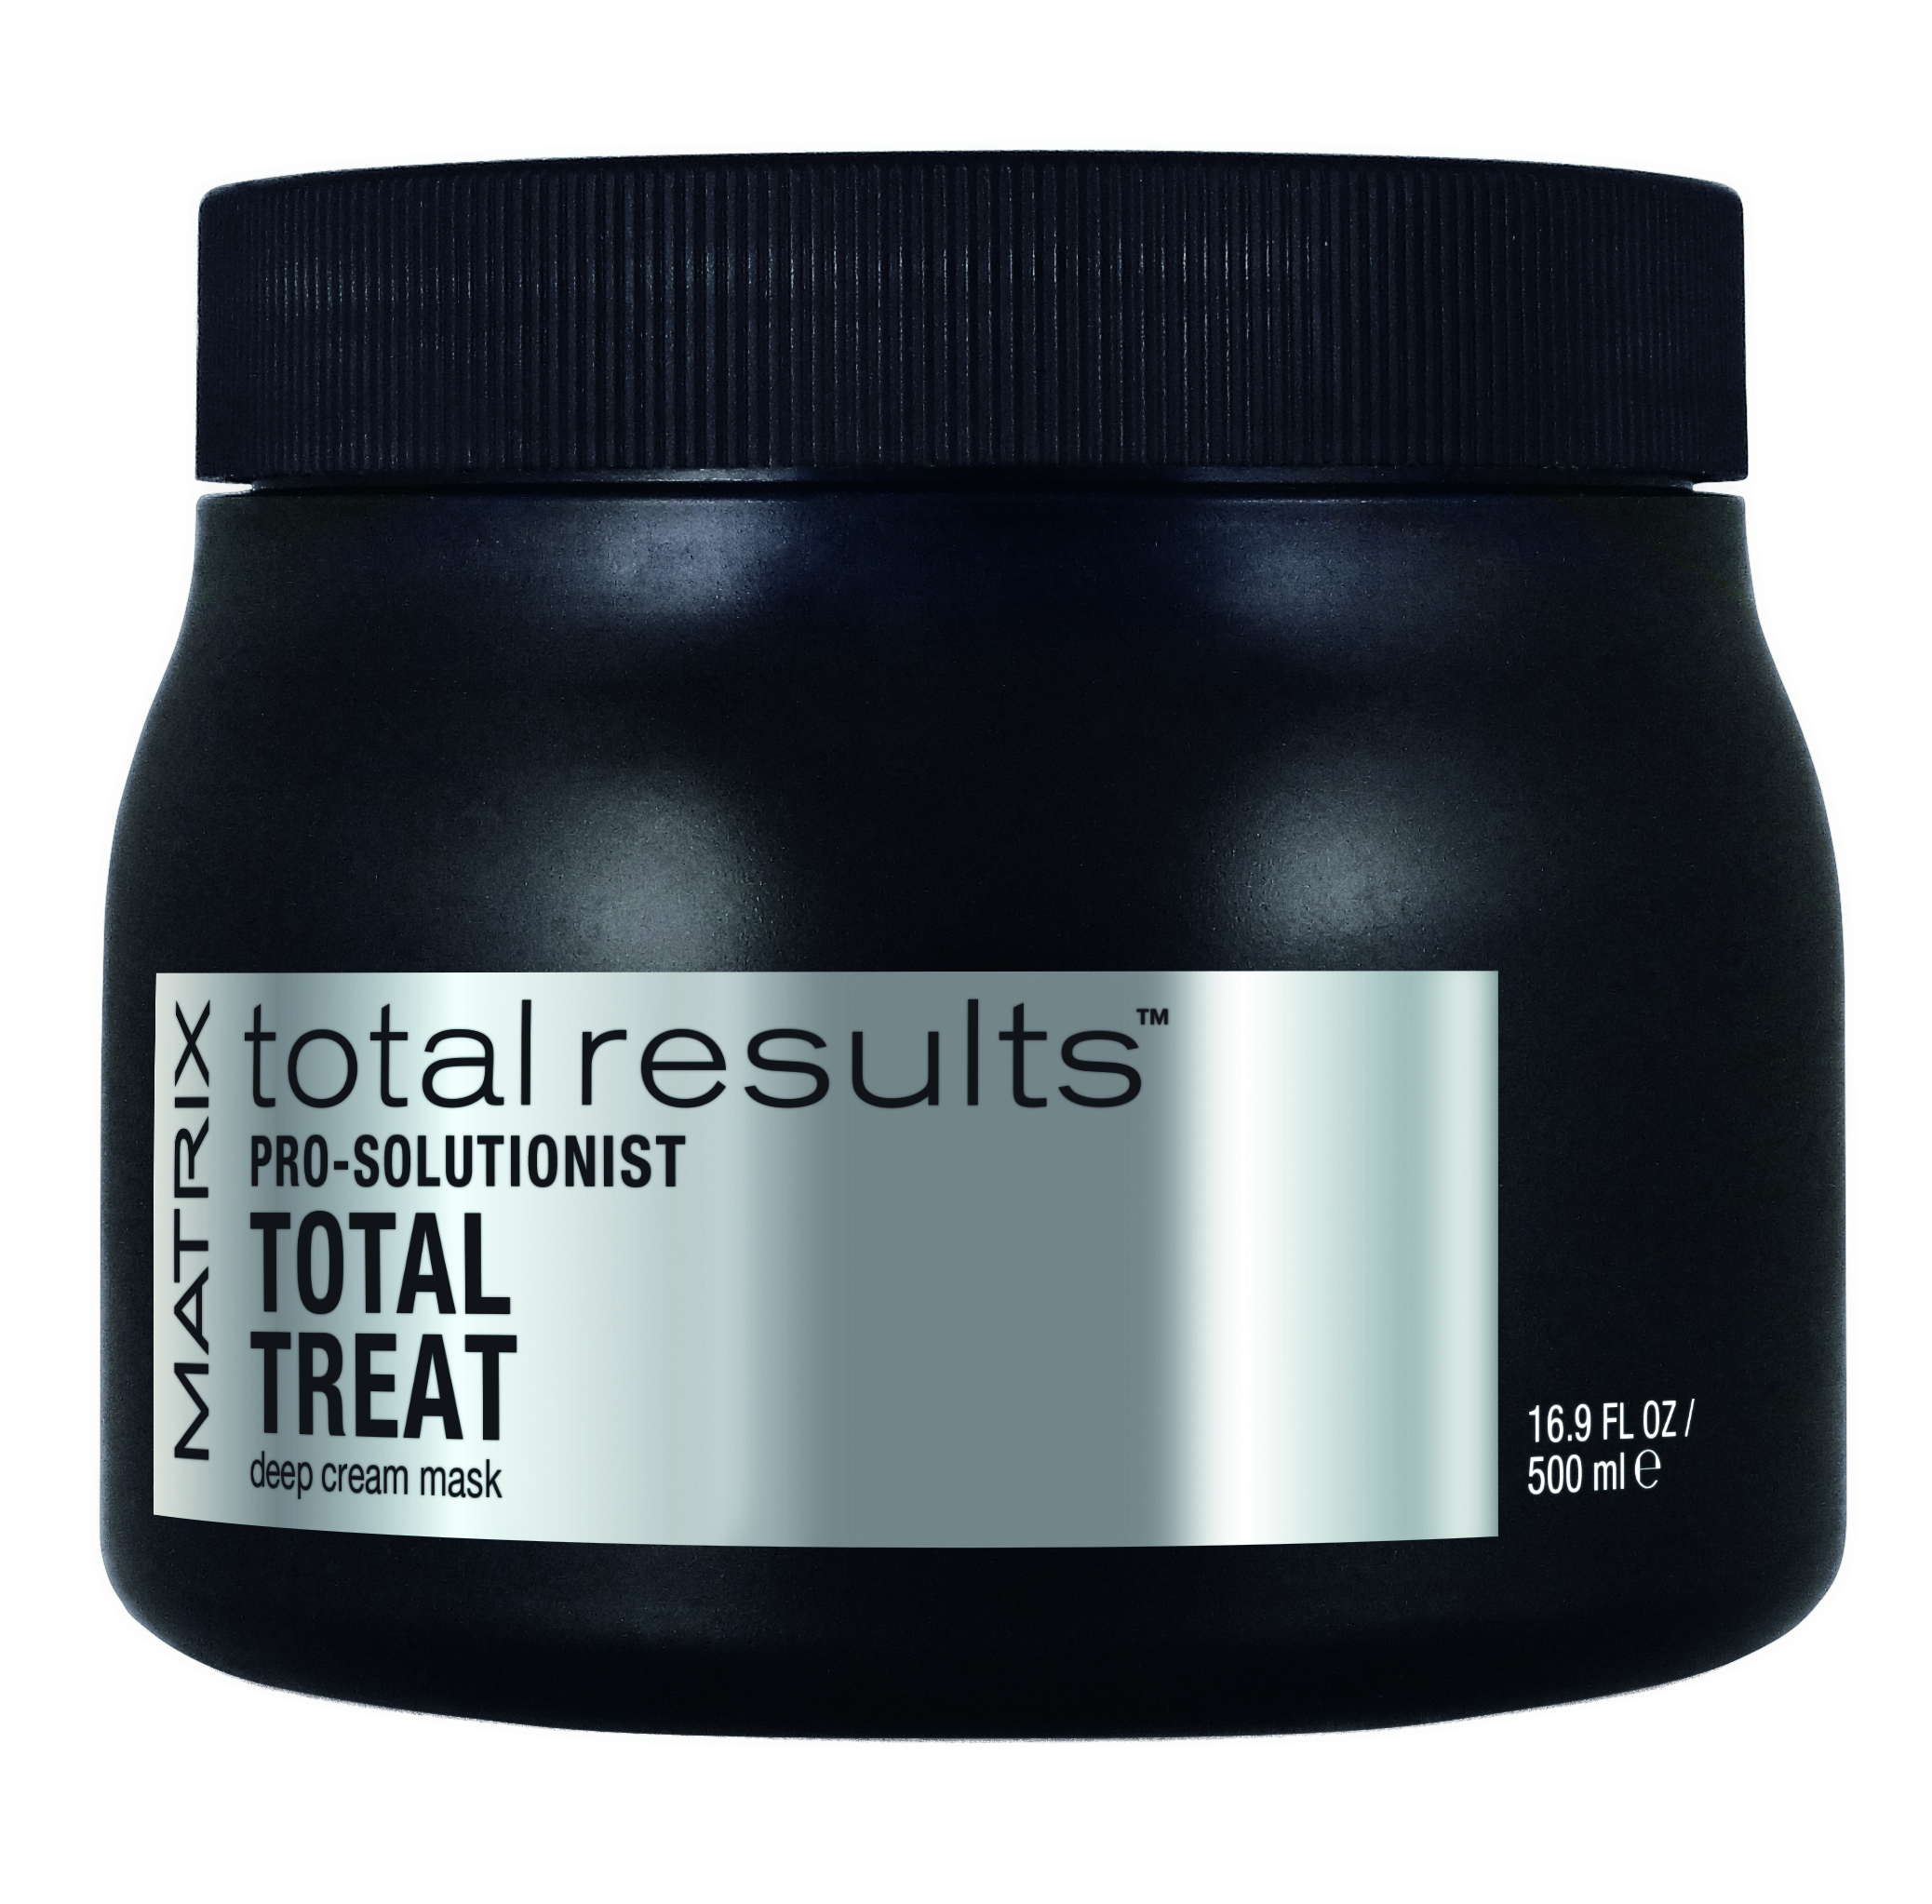 Total results Pro Solutionist Total Treat, 500 ml